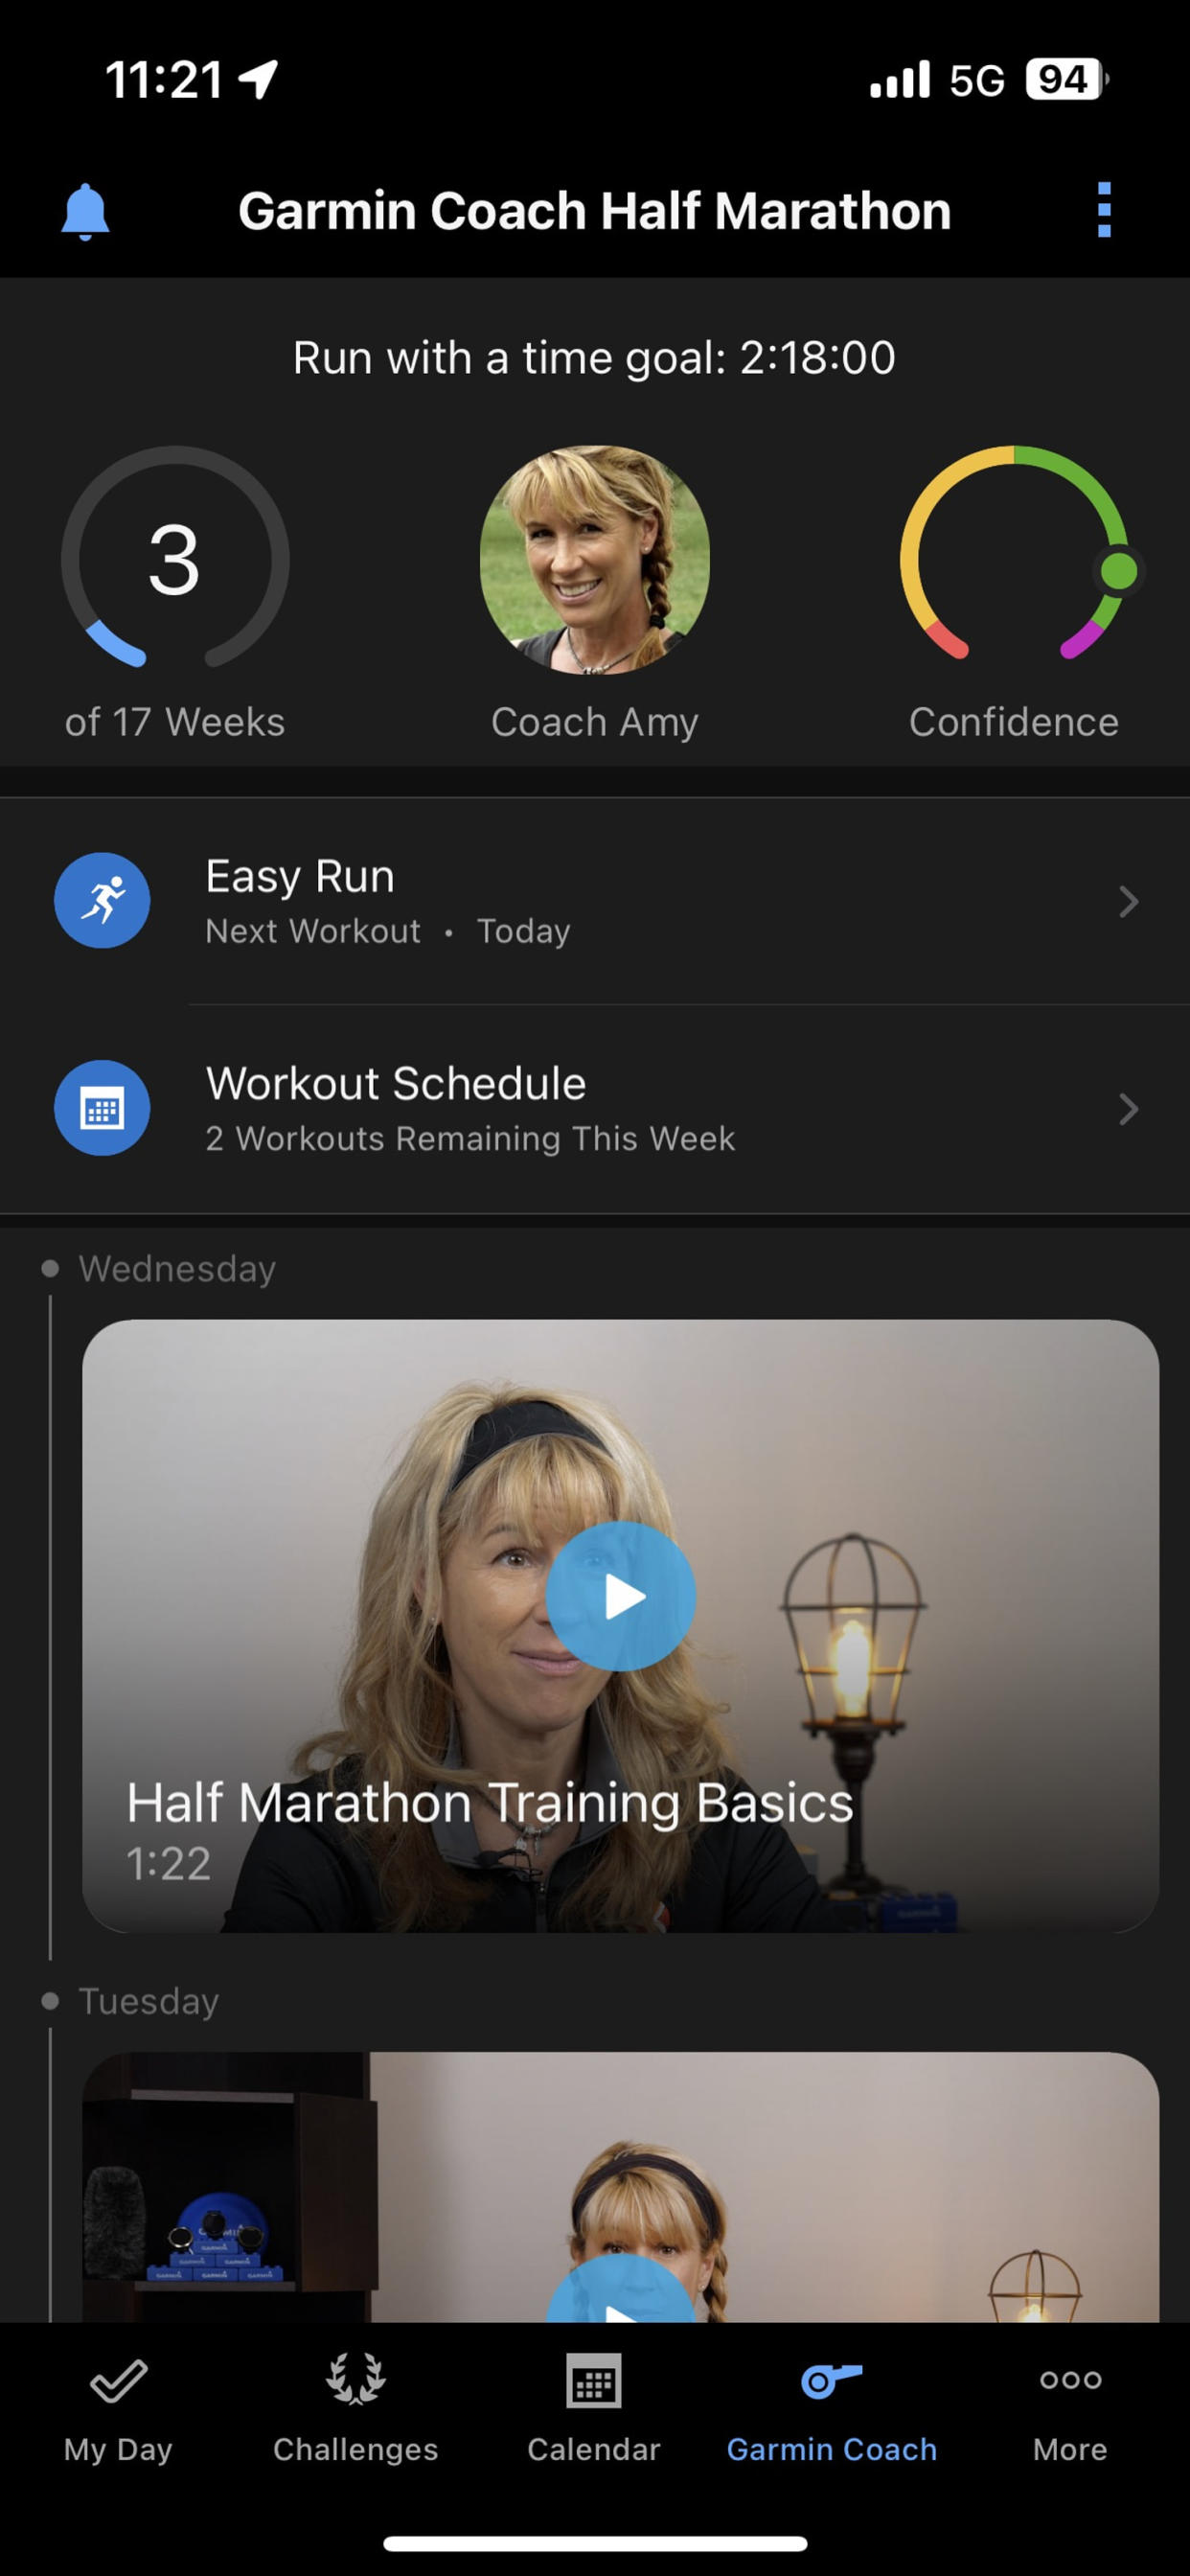 An image of the Garmin Coach screen within the Garmin Connect app, showing upcoming runs and training videos from the Garmin virtual coach. (Courtesy Harry Rabinowitz)